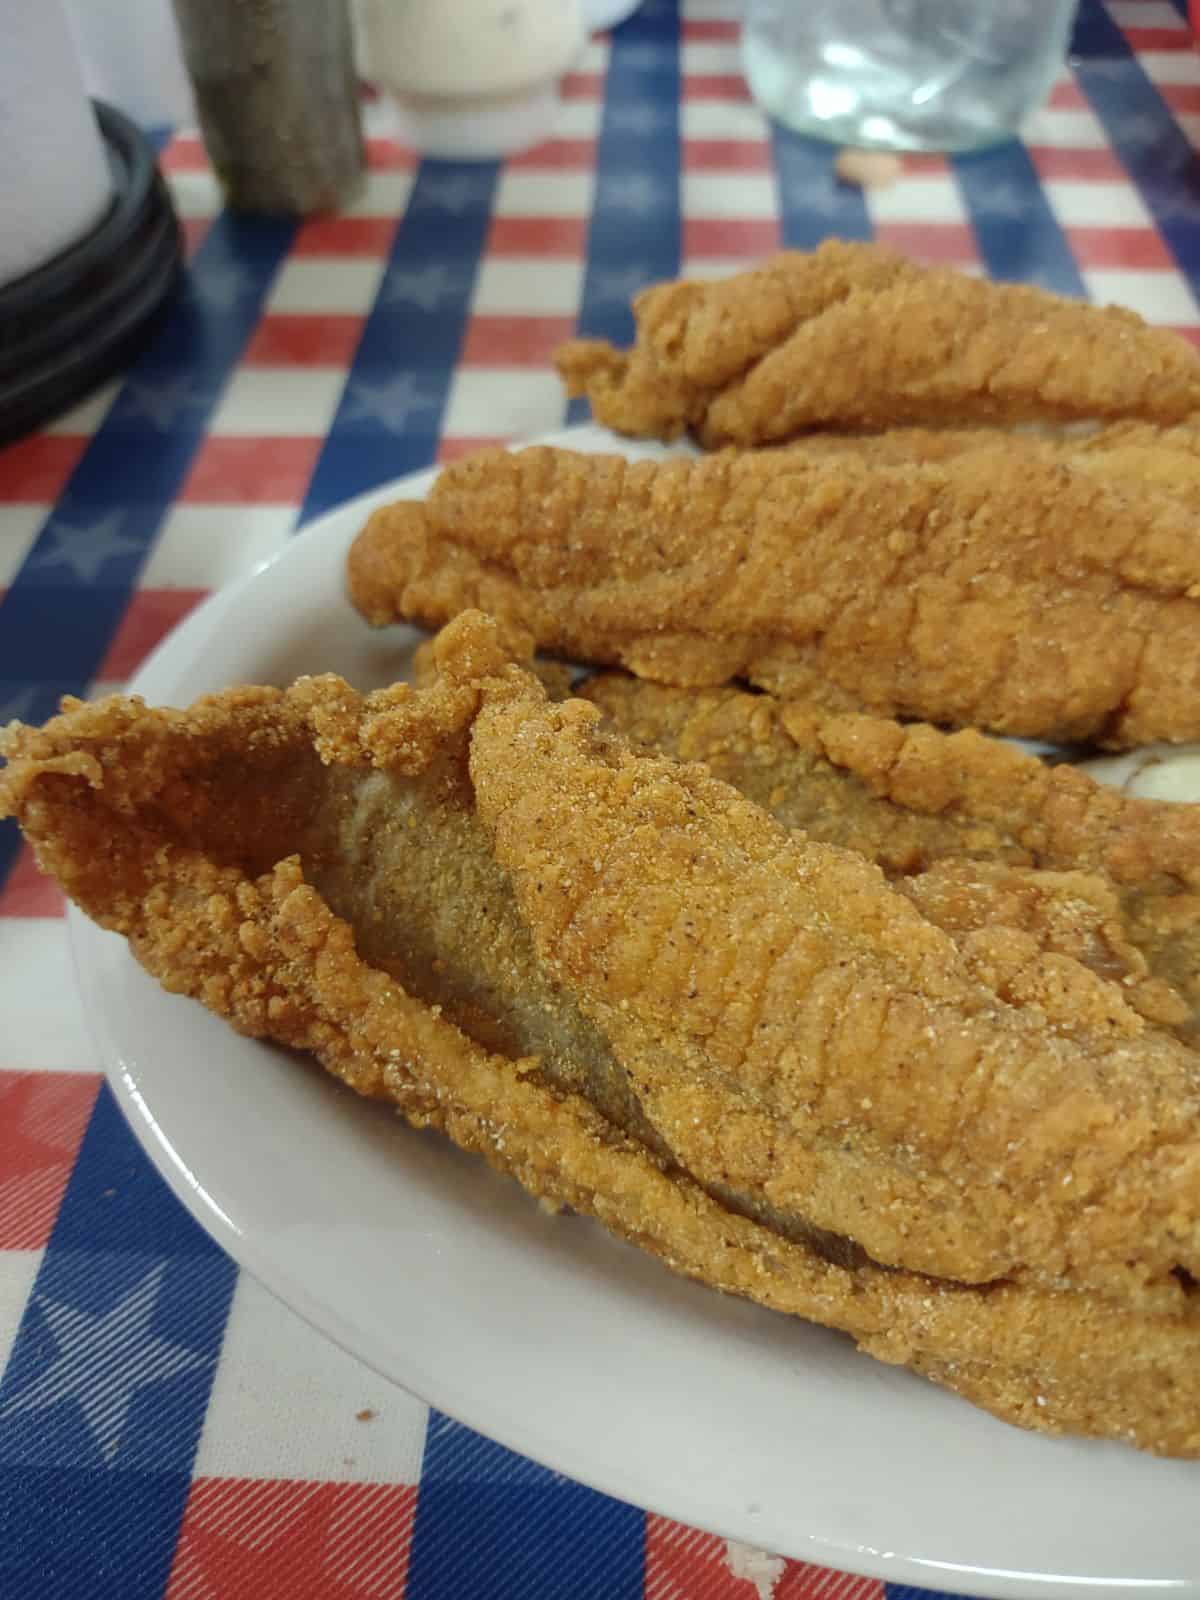 Breaded fried catfish on a white plate with an Americana table cloth.